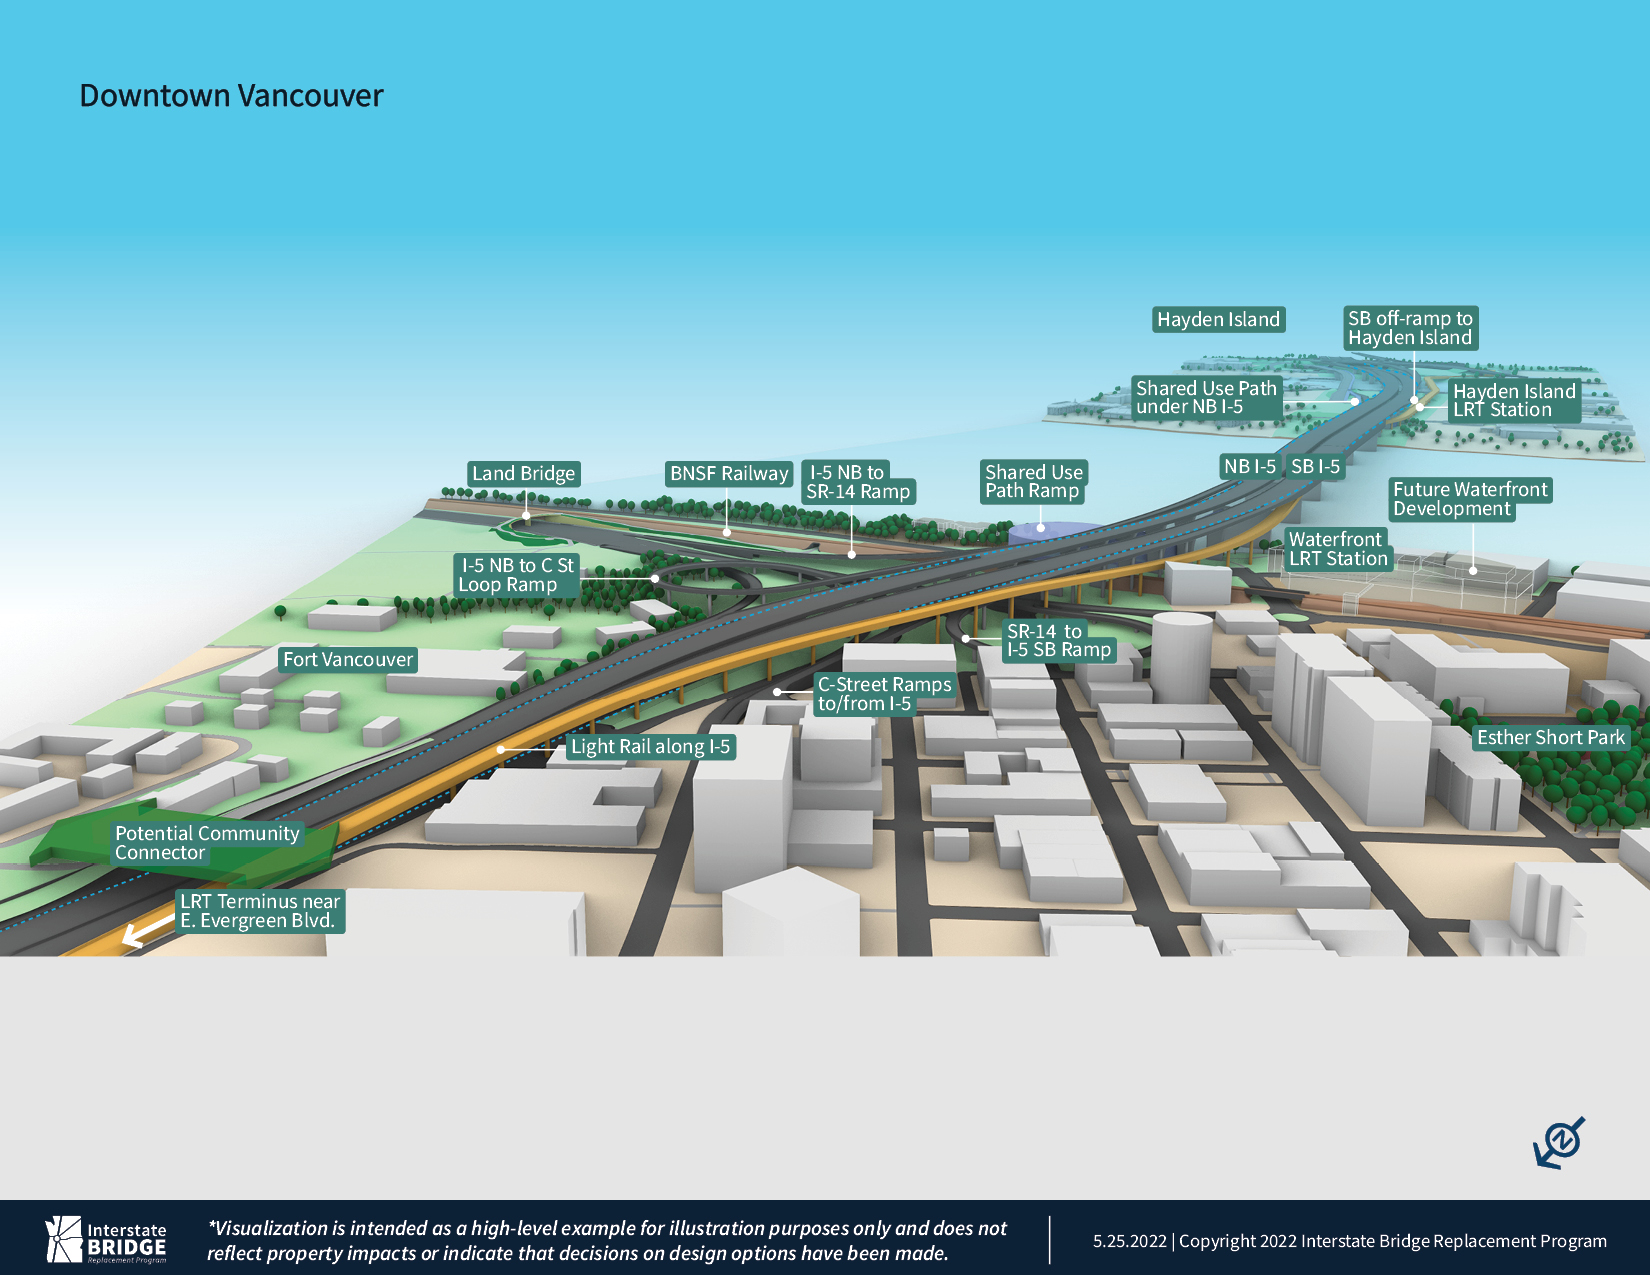 The image depicts downtown Vancouver and shows reconstruction of all ramp connections that are currently available and connects the ramps to the higher Interstate 5 corridor. Local roads are extended under the Interstate 5 corridor to extend Main Street and extend the east-west connections under the bridge.